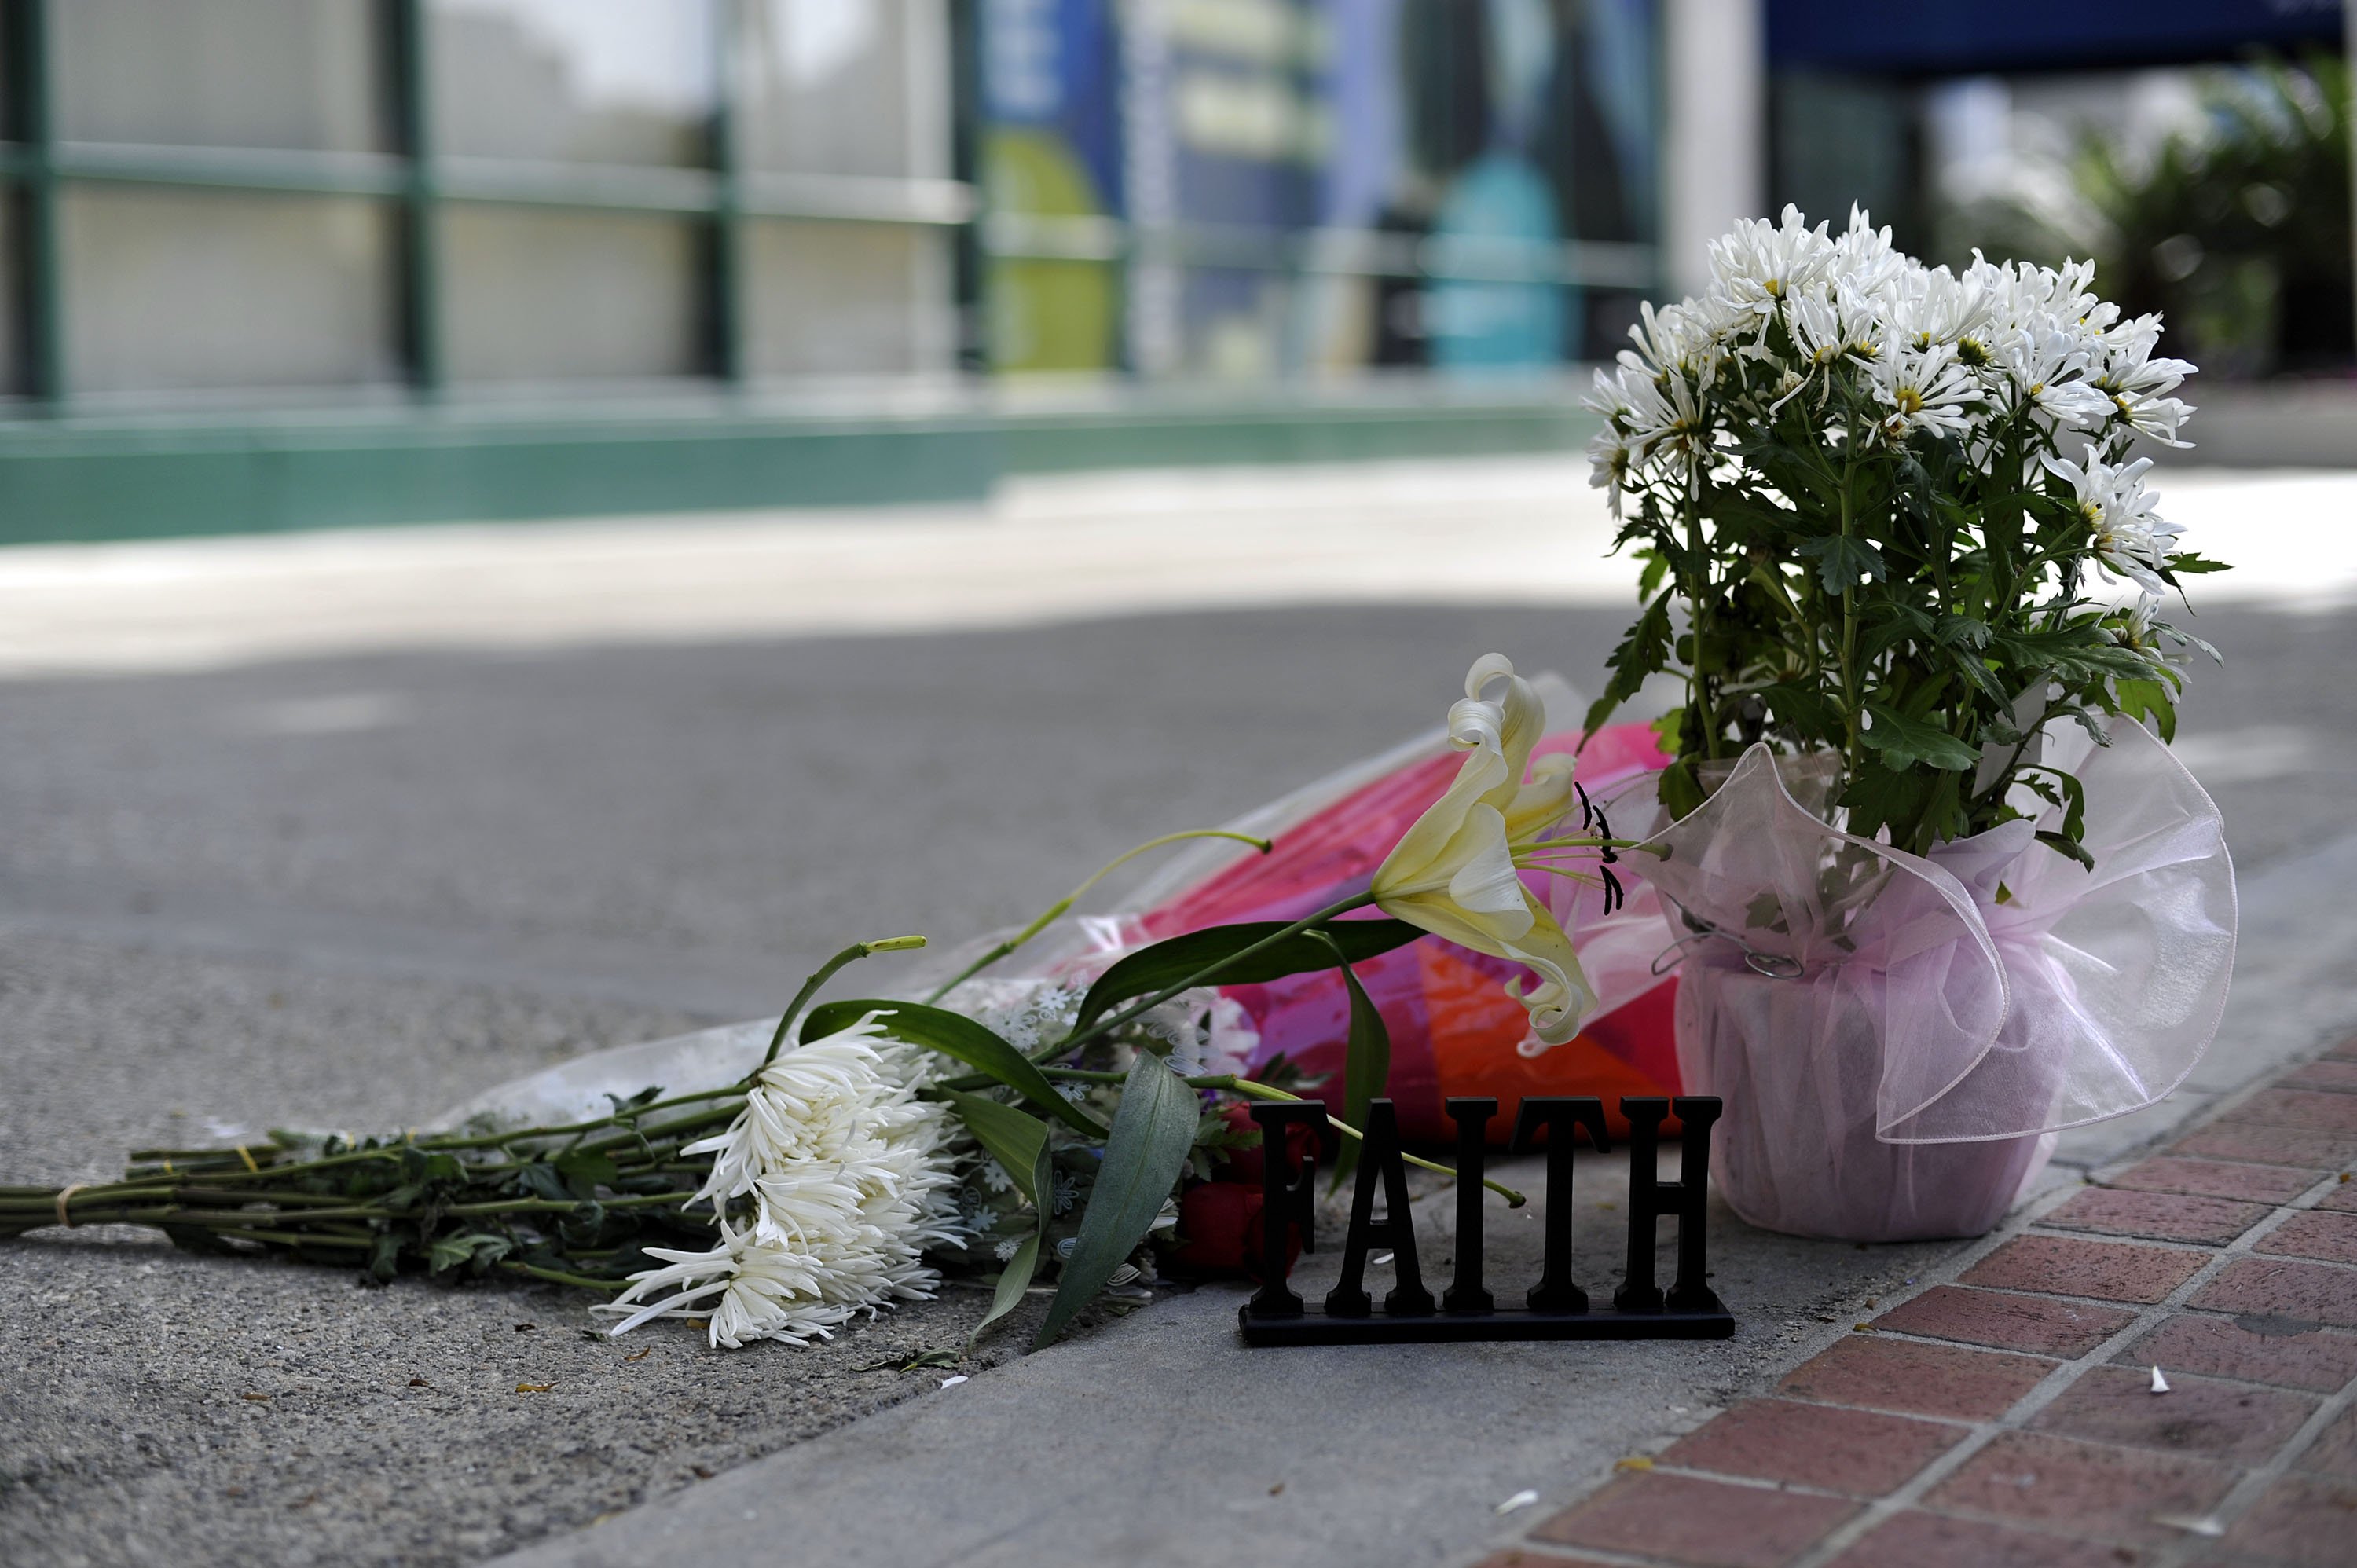 Flowers are placed in front of the building at the 900 block of South Flower Street where Marie Osmonds son Michael Blosil committed suicide on February 28, 2010 in Los Angeles, California | Source: Getty Images 